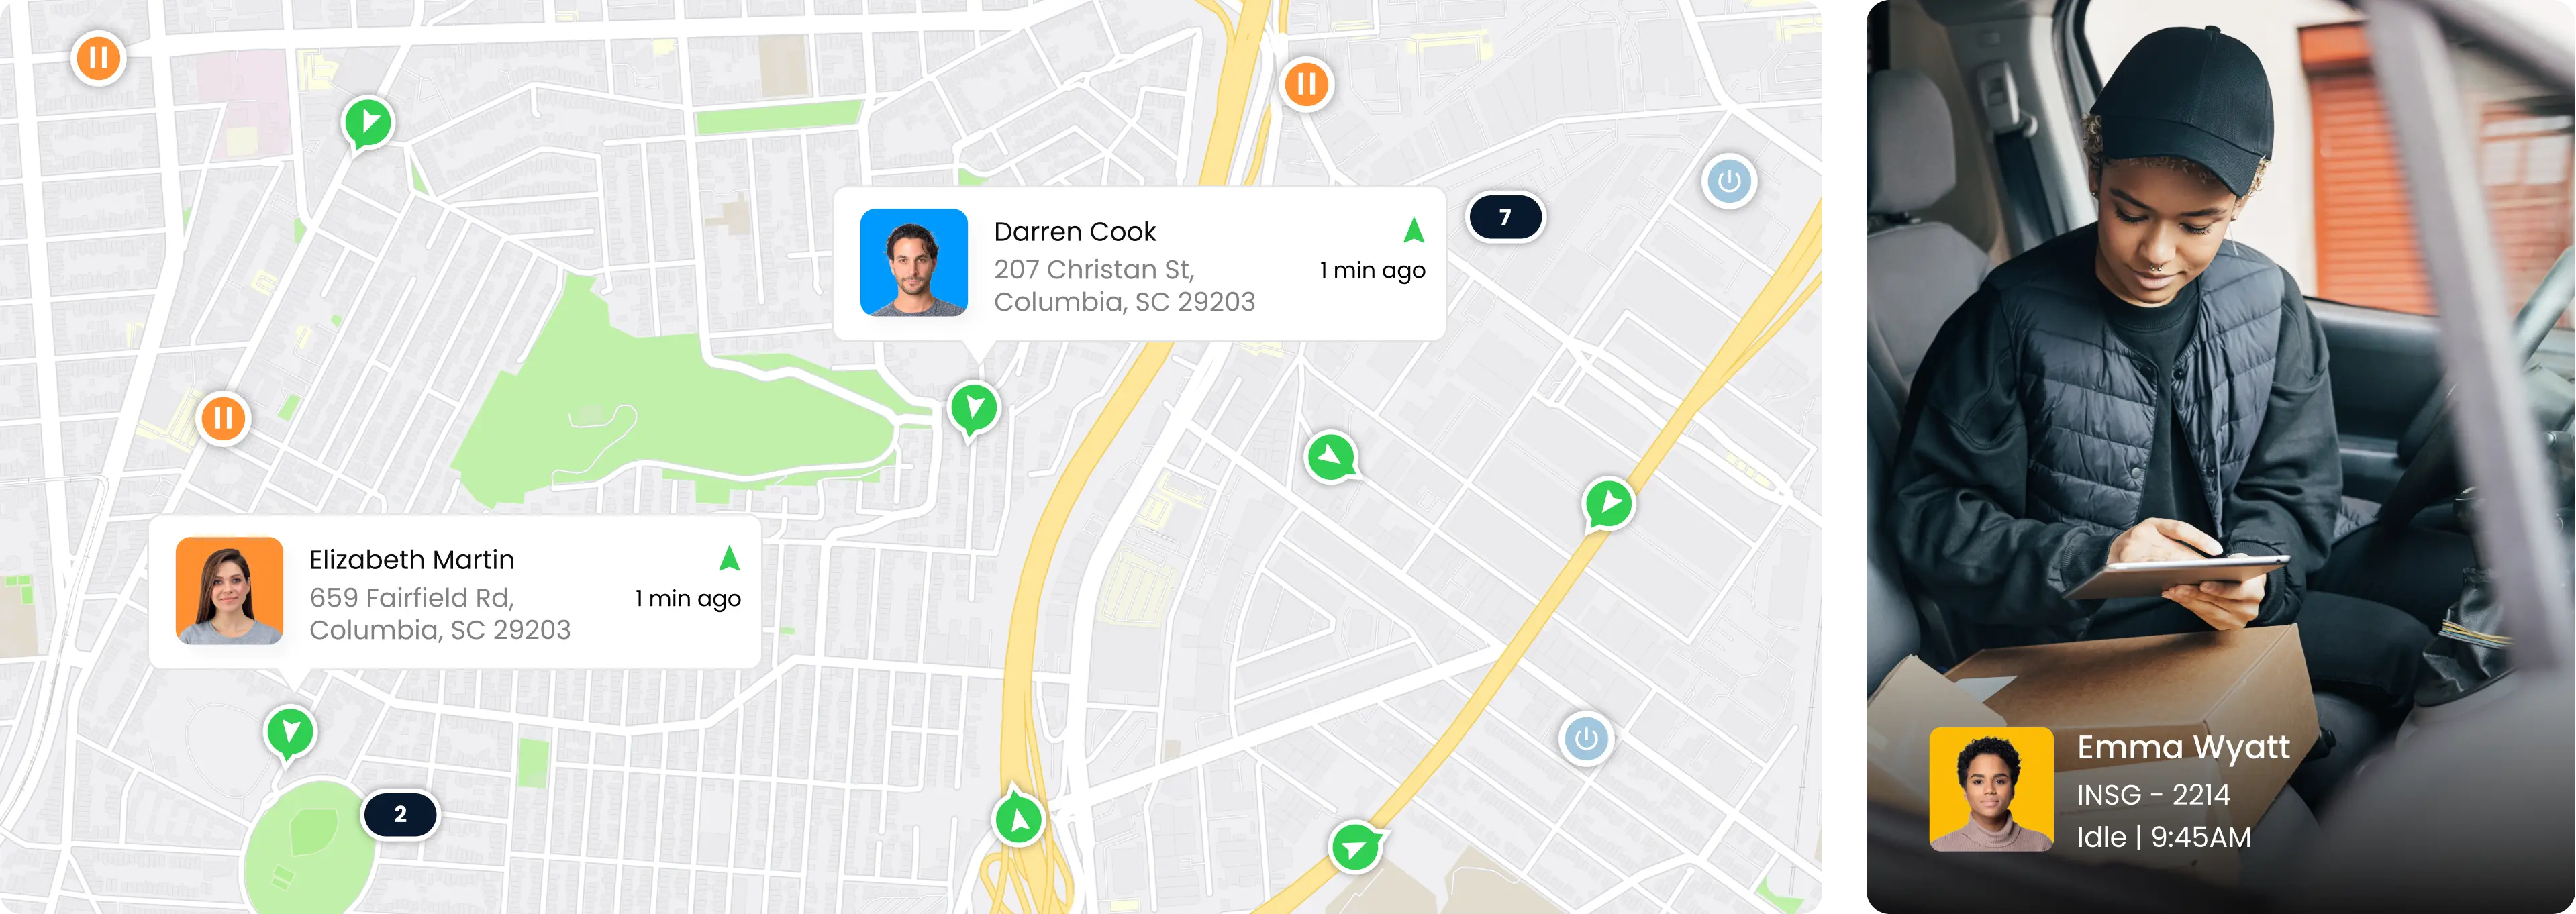 Bird's eye view of Inseego's fleet tracking software showing the location of drivers.